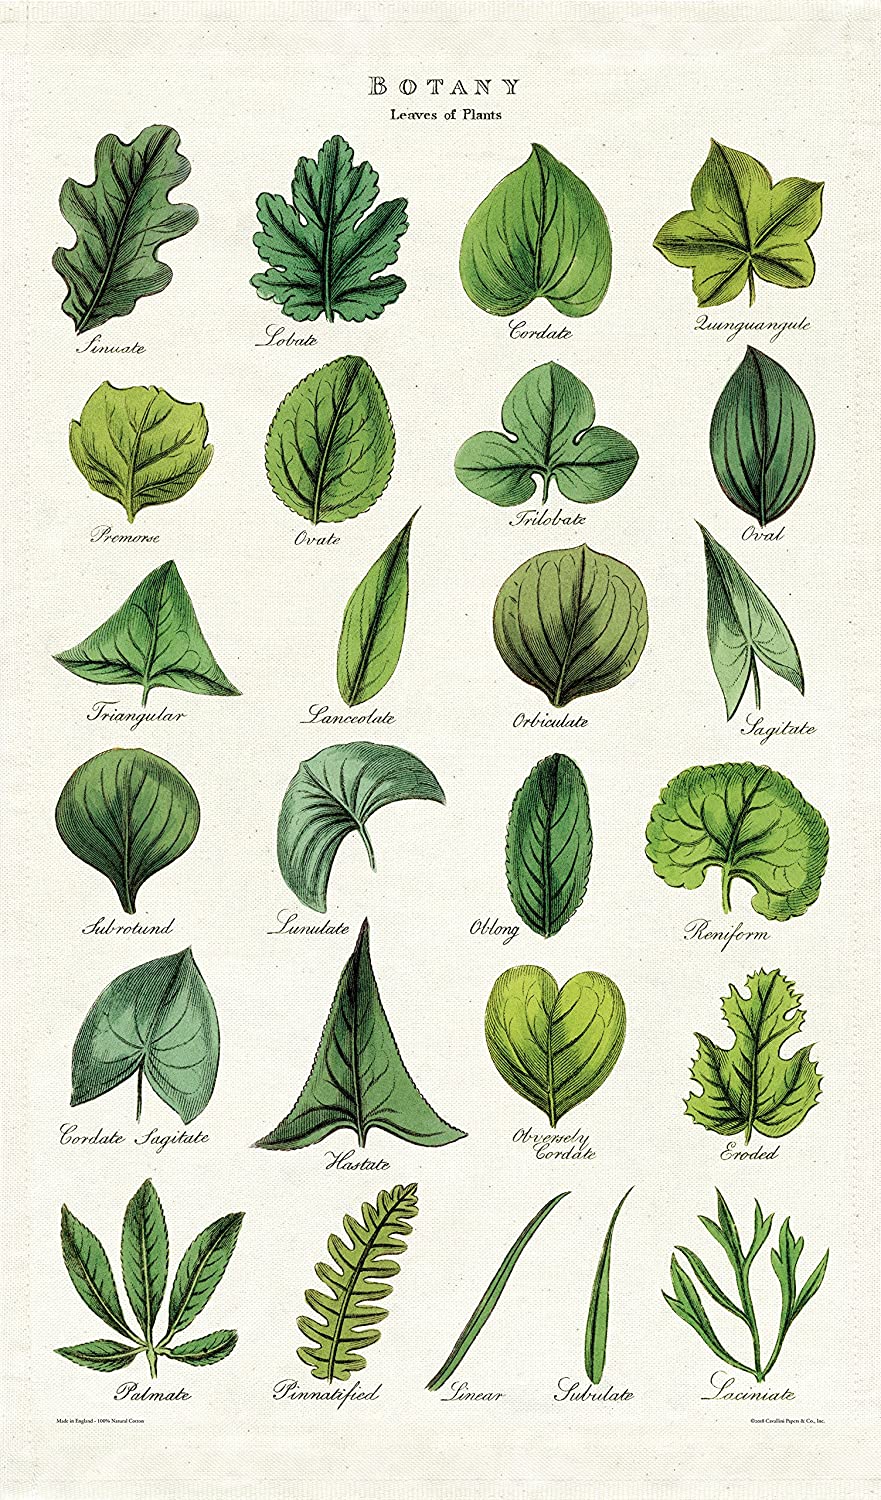 Botany- Leaves of Plants Poster Wrap